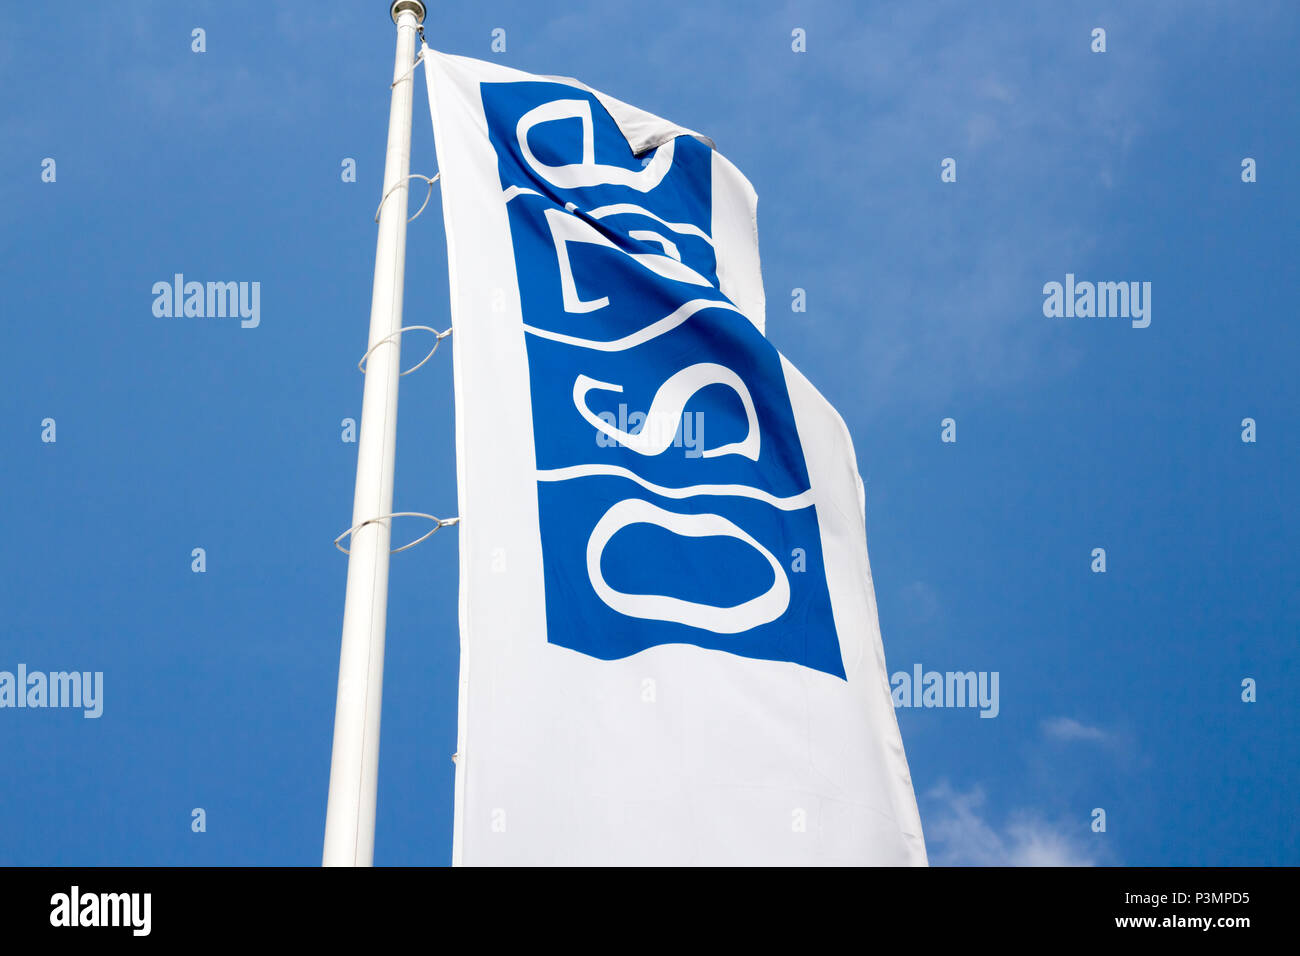 Vienna Austria June.15 2018, Organization for Security and Co-operation in Europe, OSCE Flags against sky Stock Photo